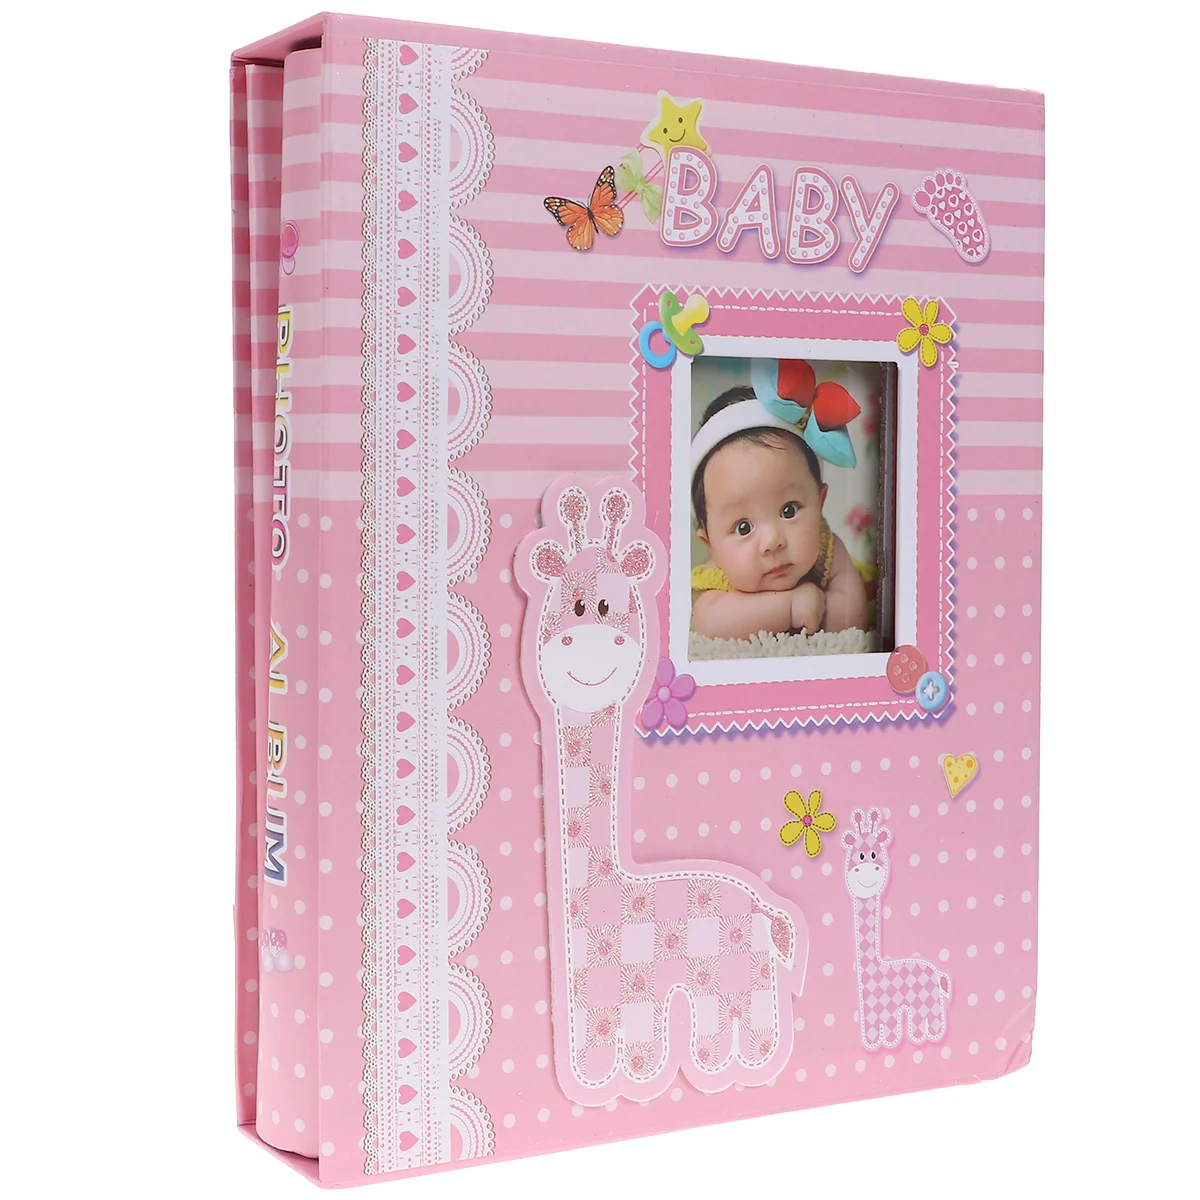 

6 Inch Photo Album Creative Commemorative Book 200 Pages Interstitial Albums Bag Personality Gift Decoration for Baby Photo